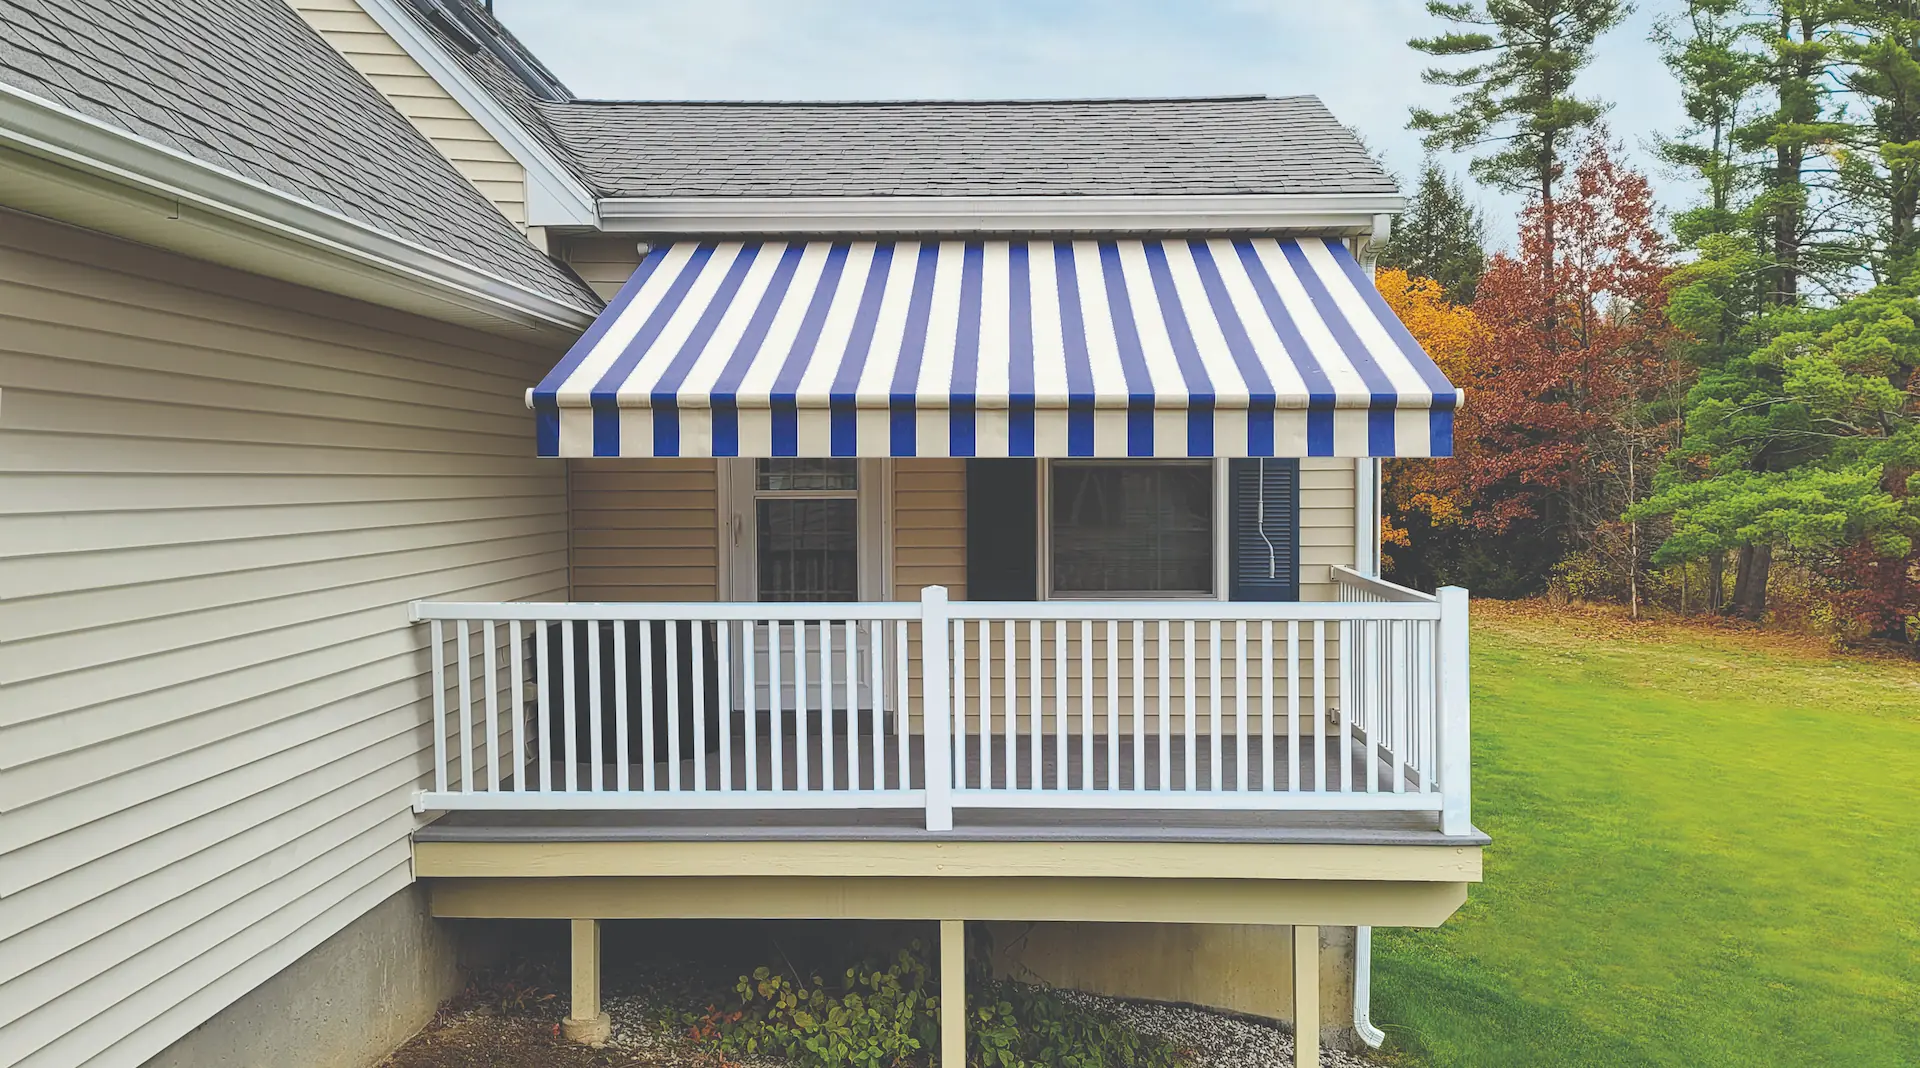 A retractable awning with blue and white stripes is extended to enhance the privacy of the rear window of a house.